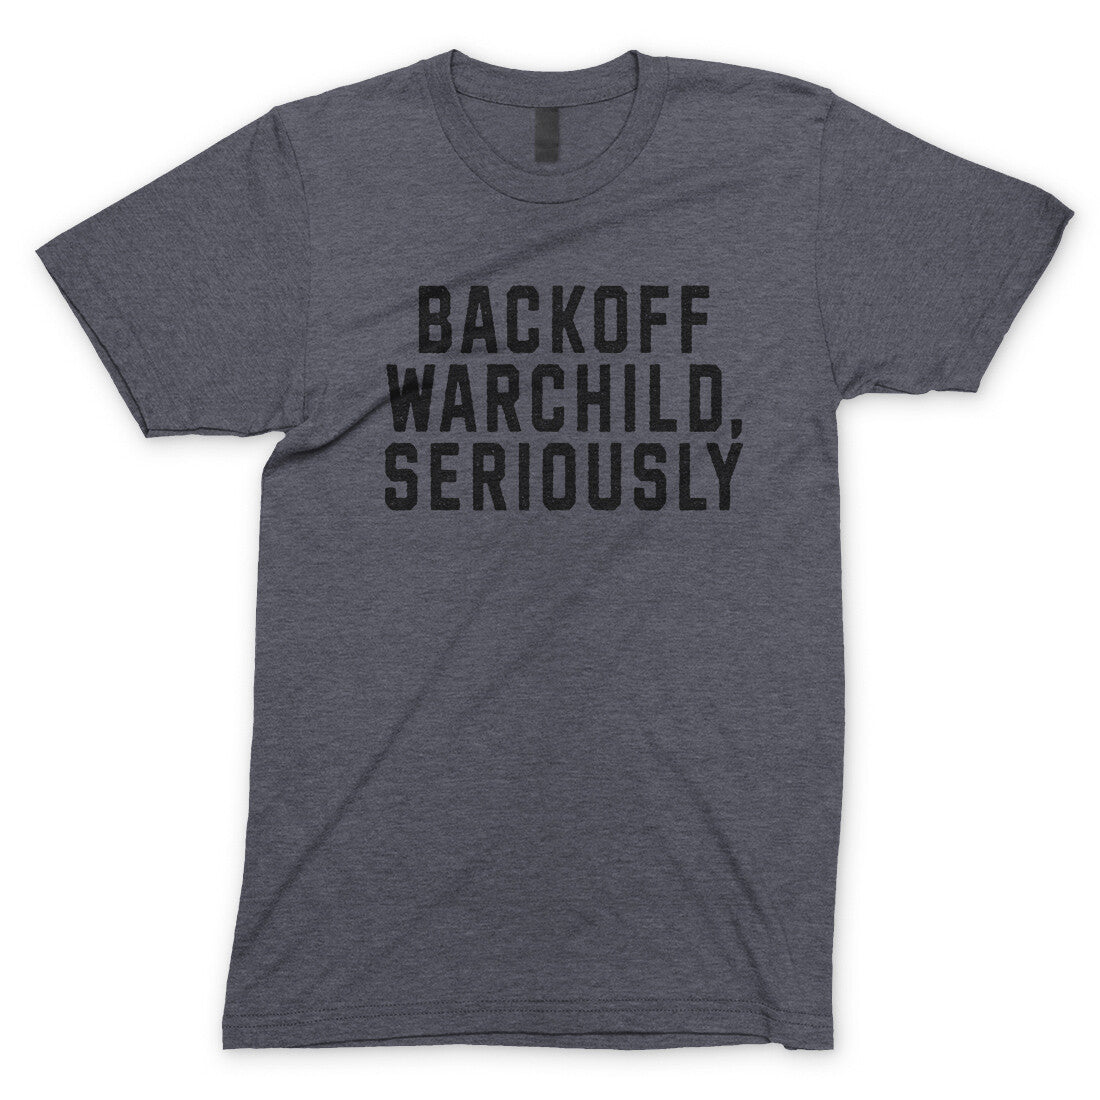 Backoff Warchild Seriously in Dark Heather Color